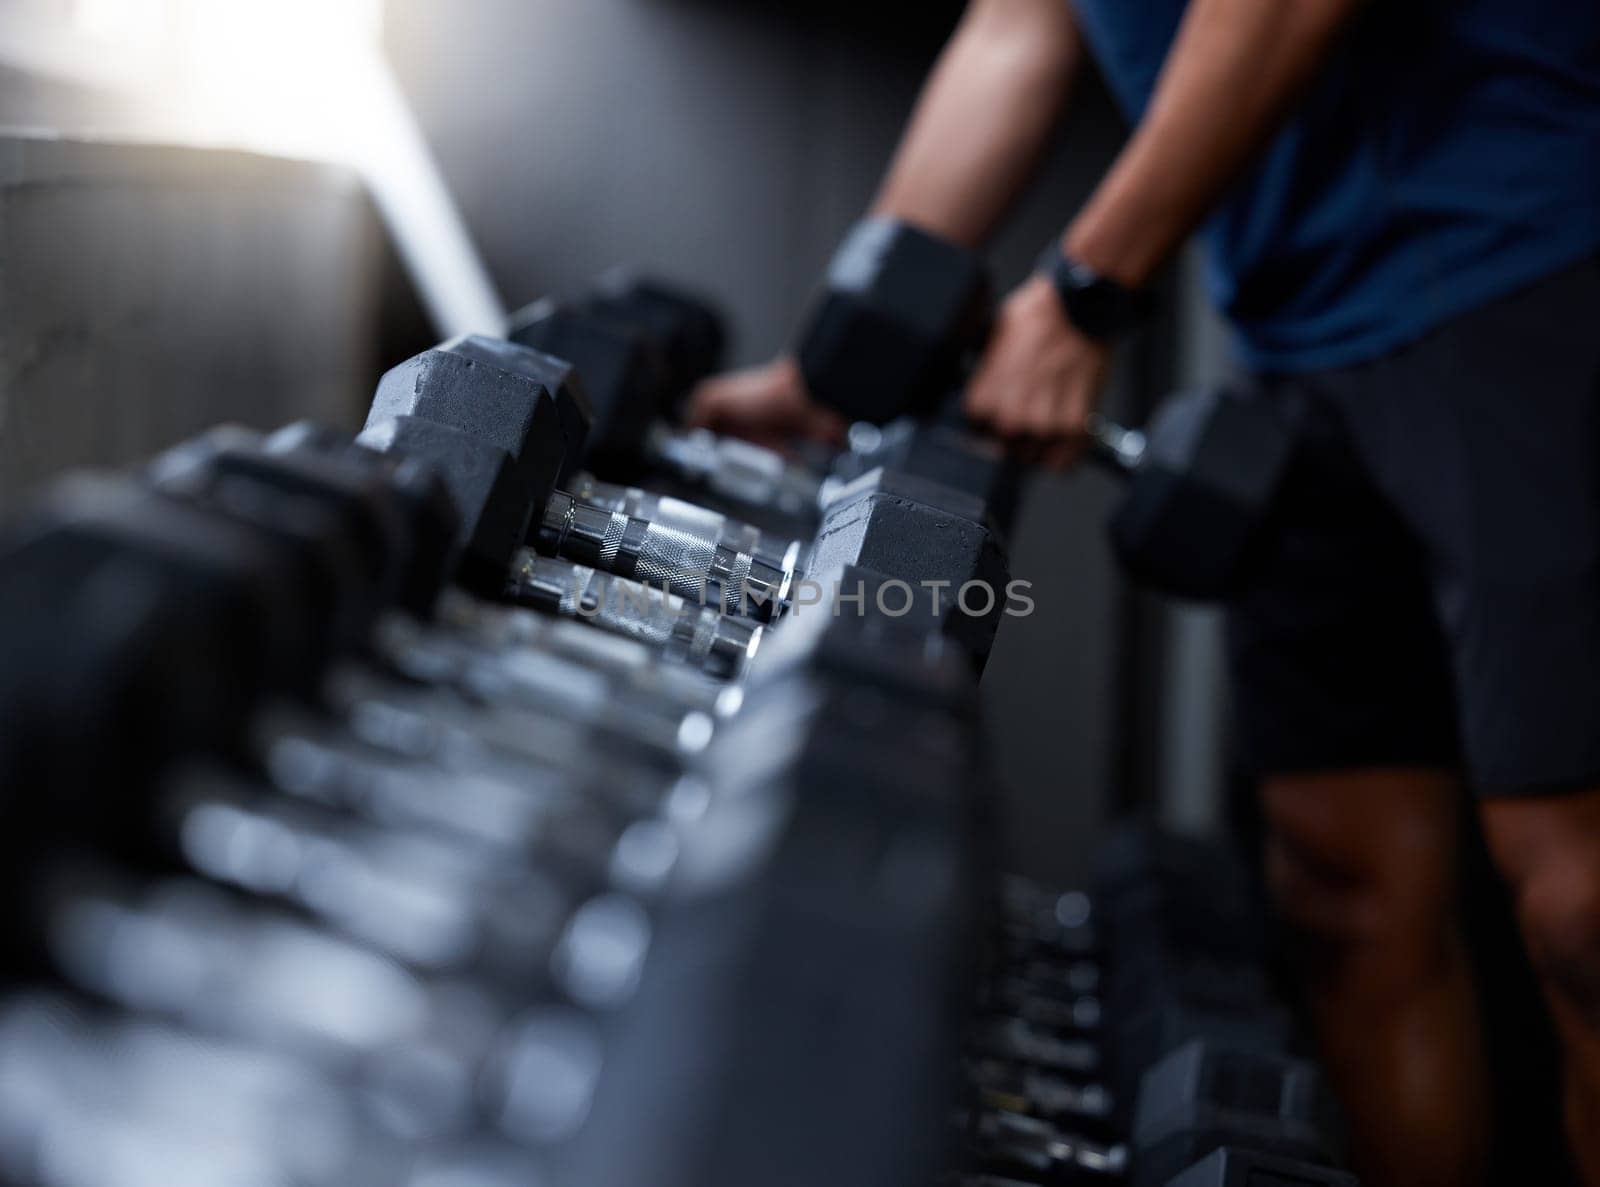 Man, hands or dumbbells in gym workout, training or exercise for strong muscle growth, healthcare wellness or bodybuilding. Zoom, texture or heavy metal weights for fitness coach or personal trainer.